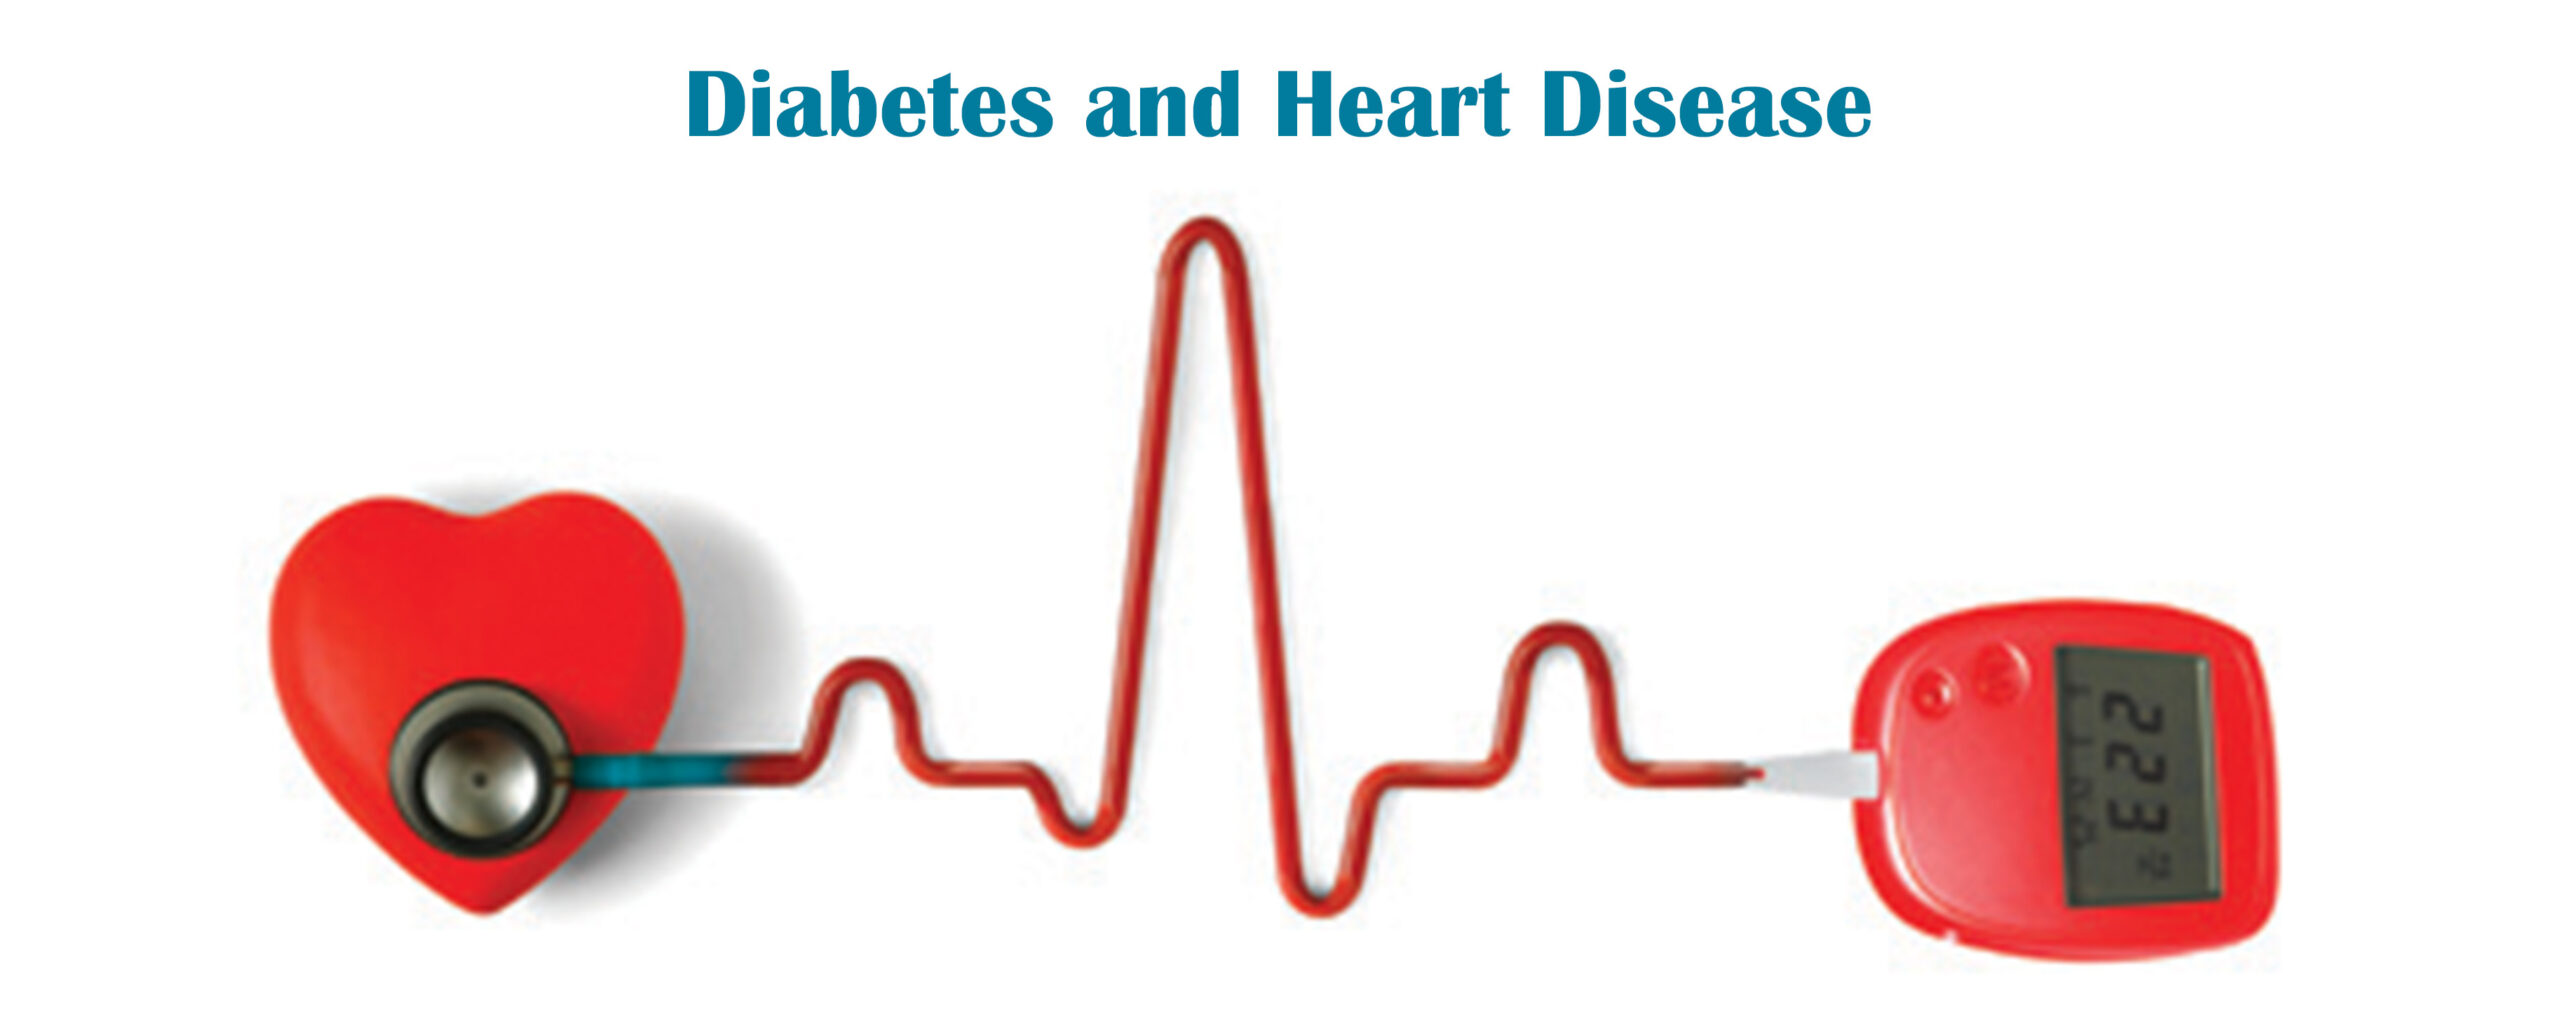 Diabetes and Heart Disease: A Complete Guide to Reducing Your Risk